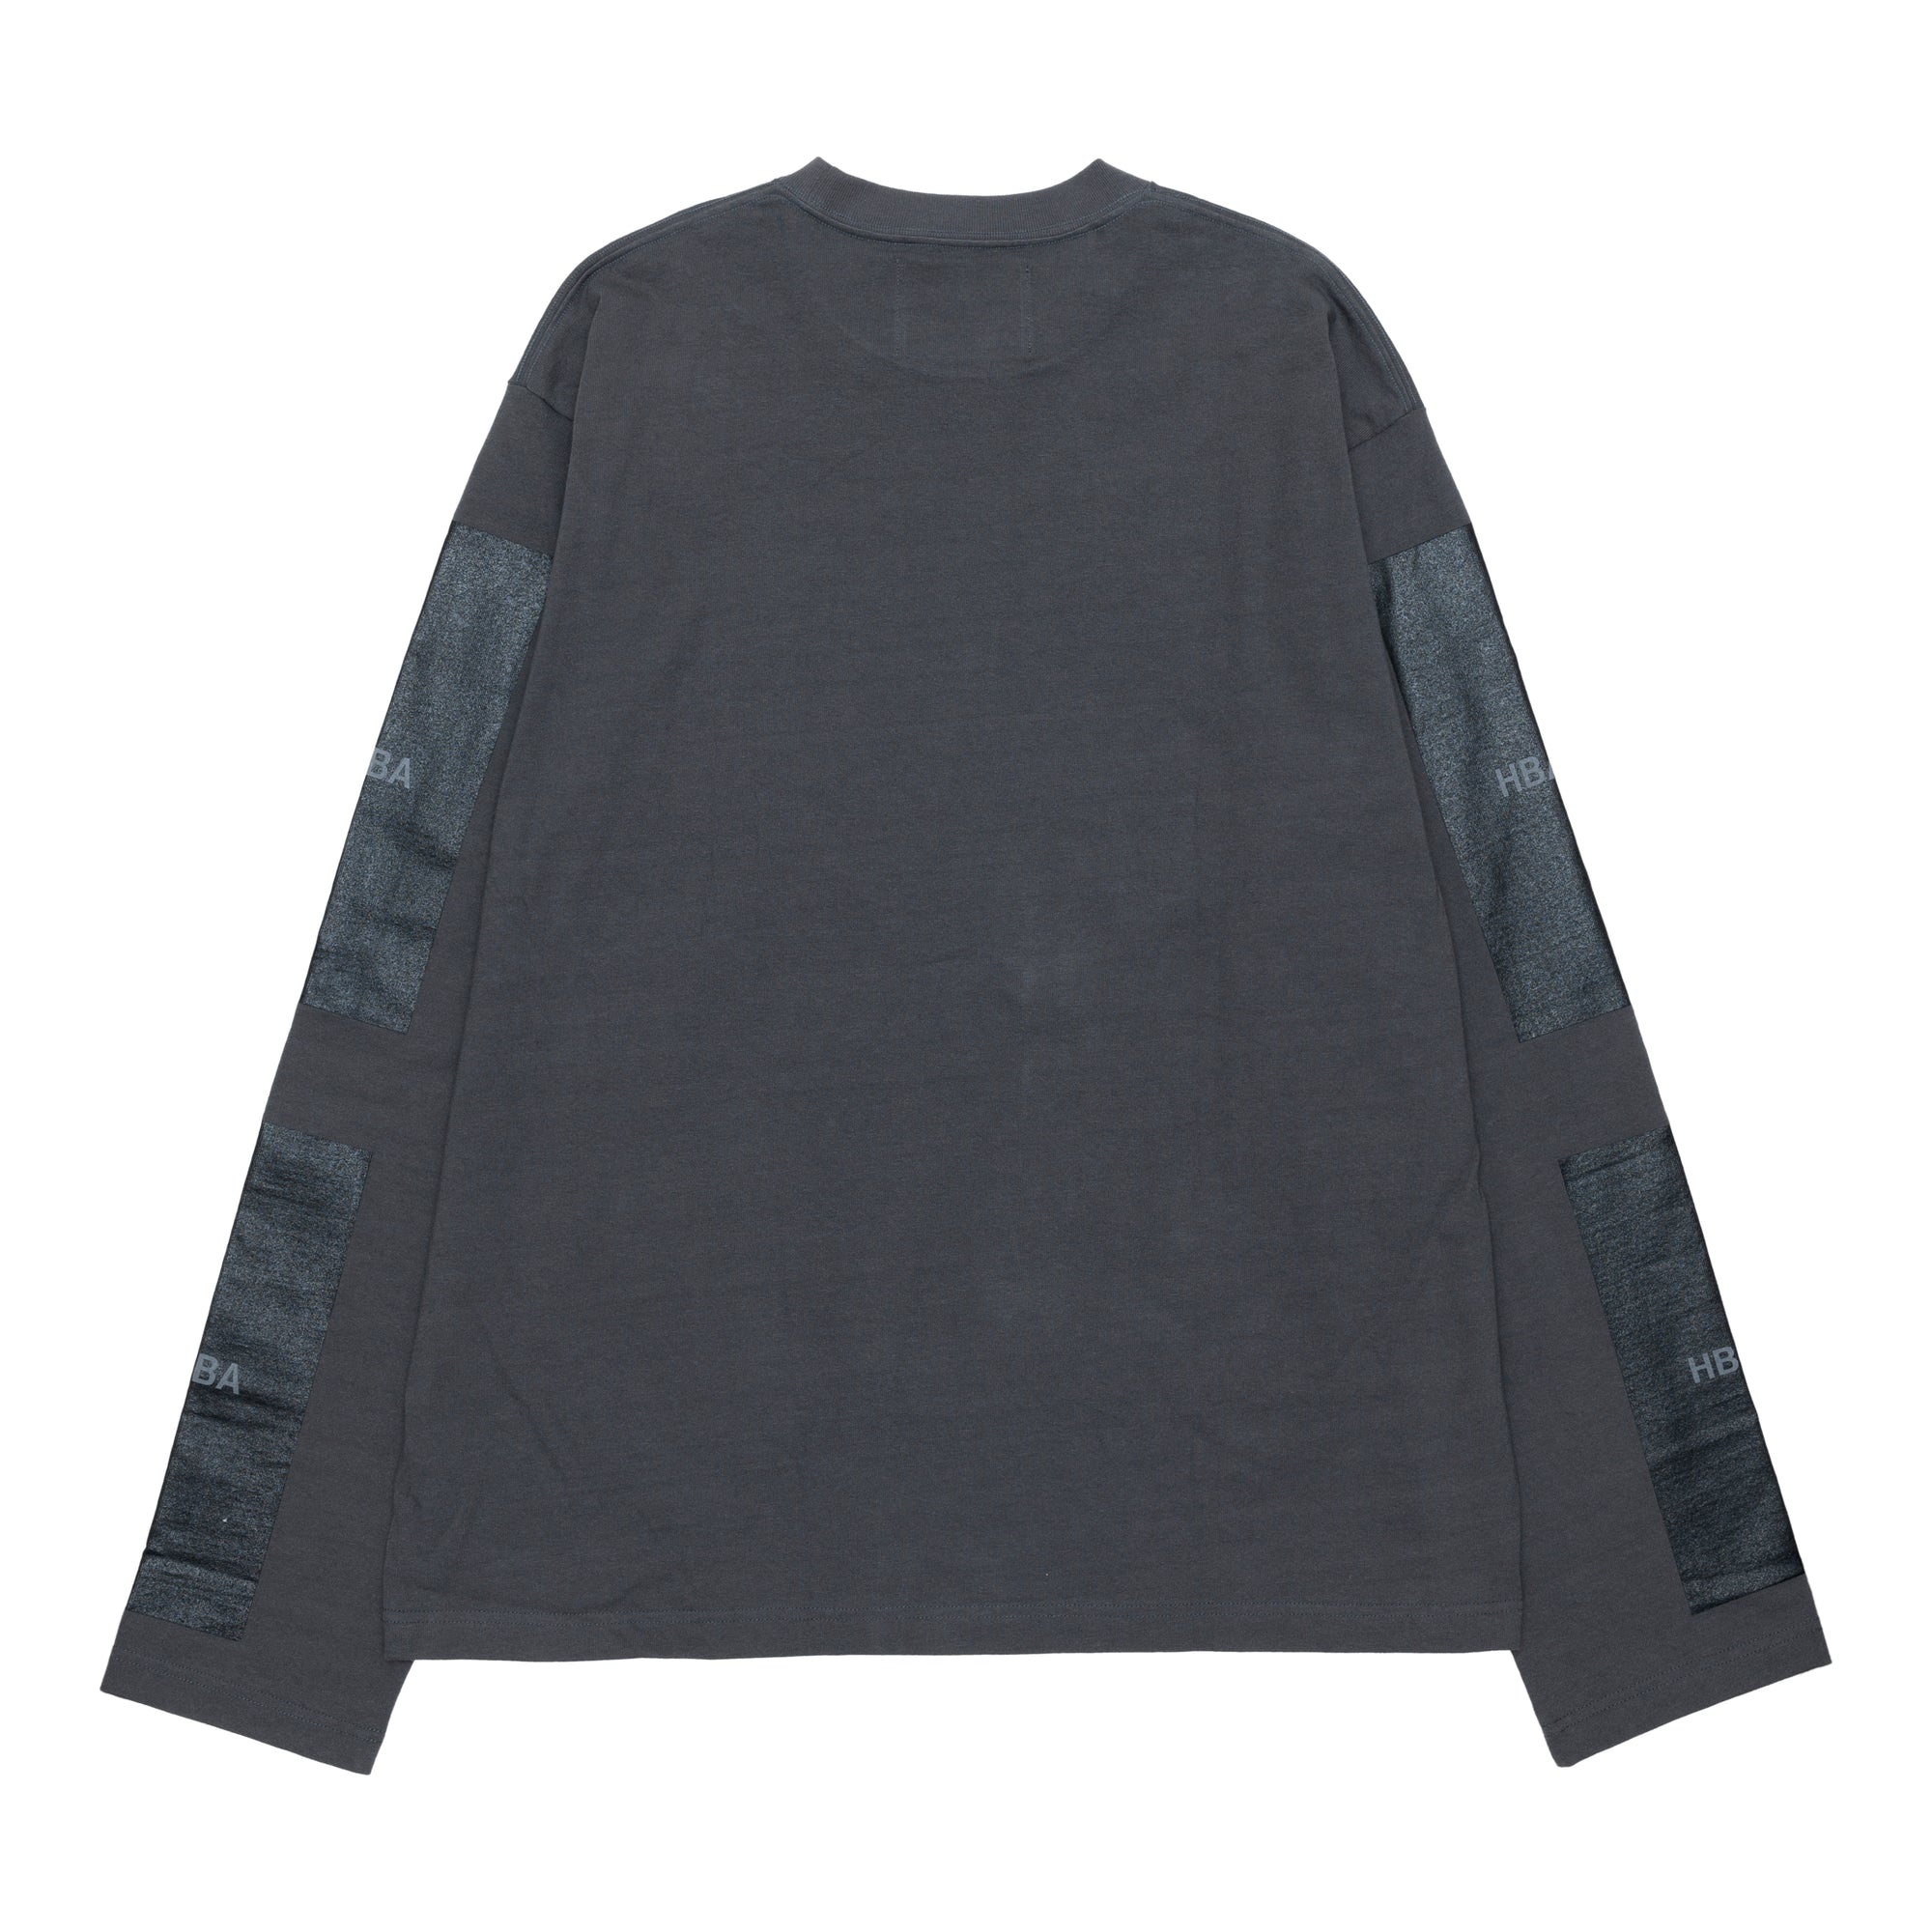 HOOD BY AIR - DSM SP BOX L/S TEE (WASHED/TRUE BLACK) view 2